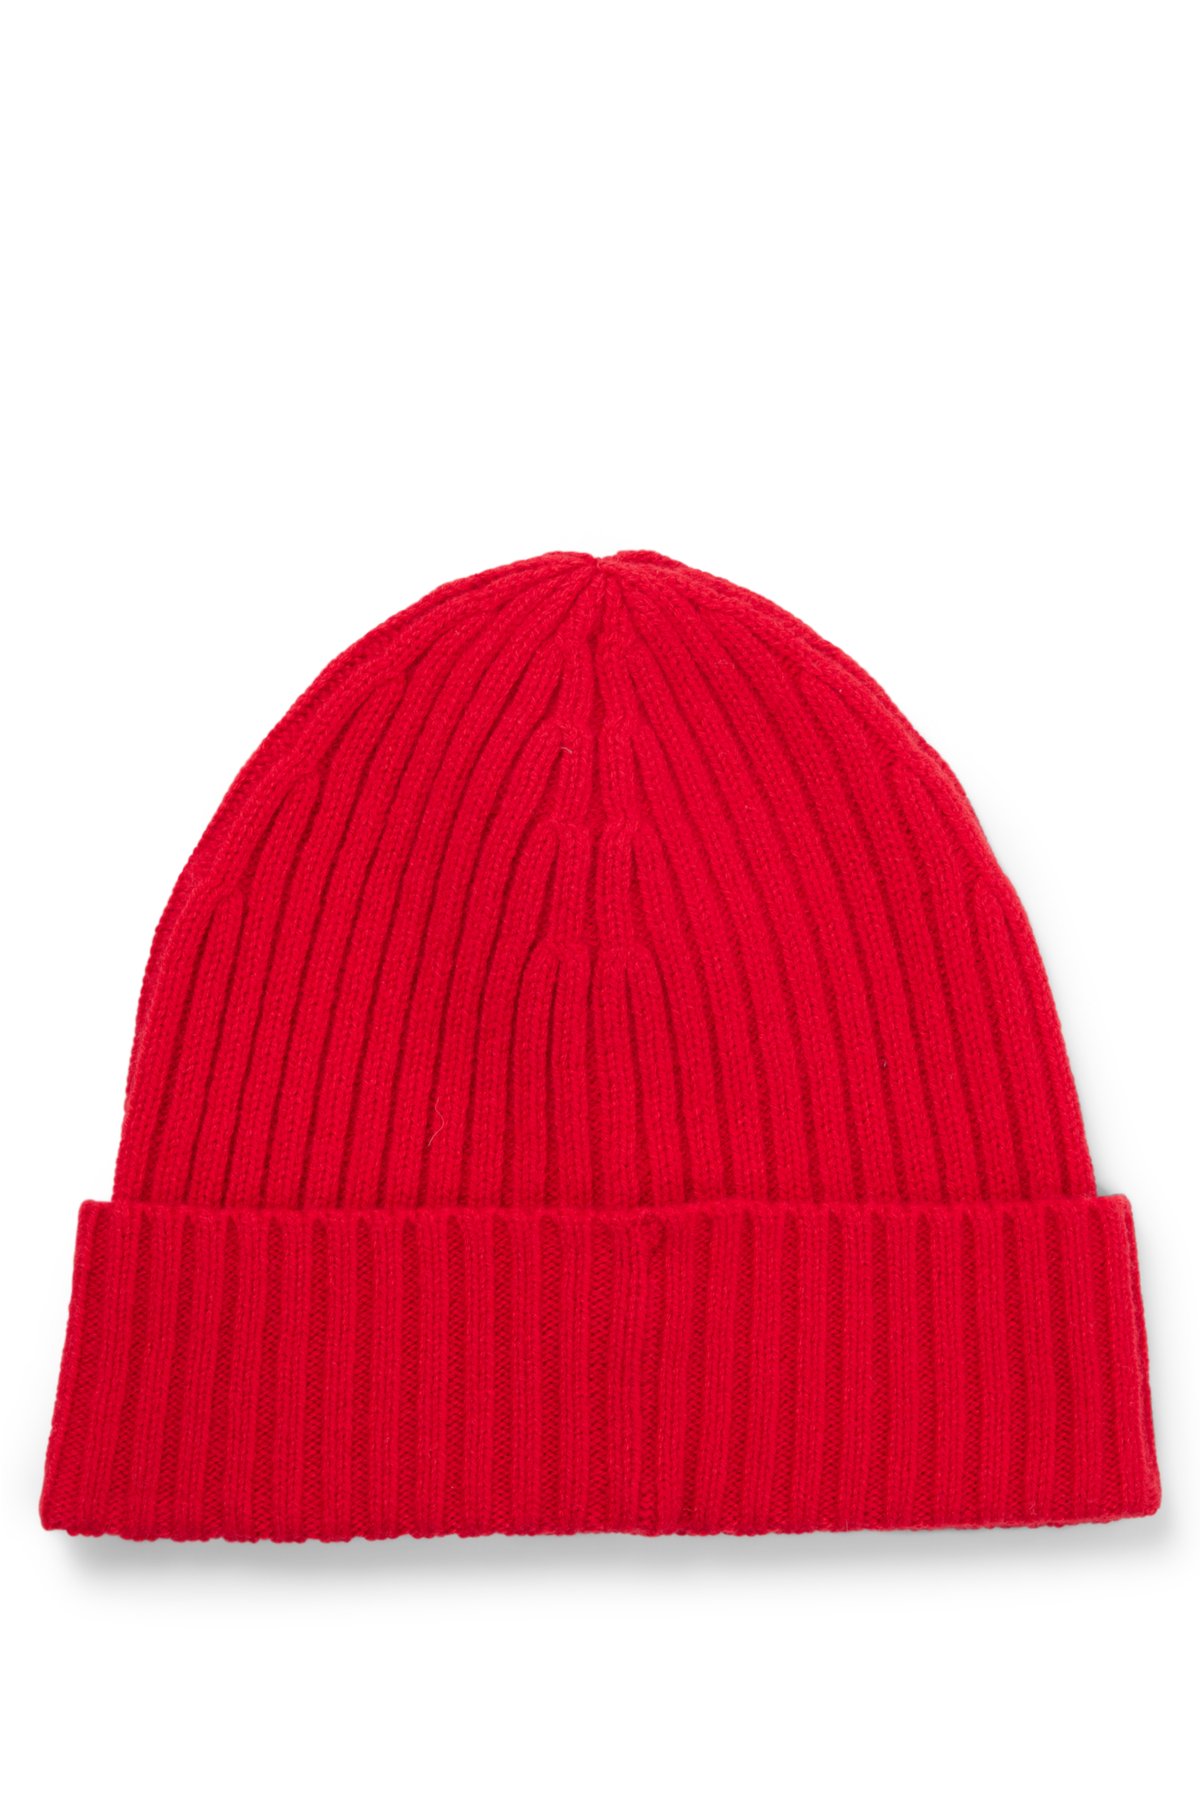 HUGO - Beanie hat in with wool virgin embroidered logo